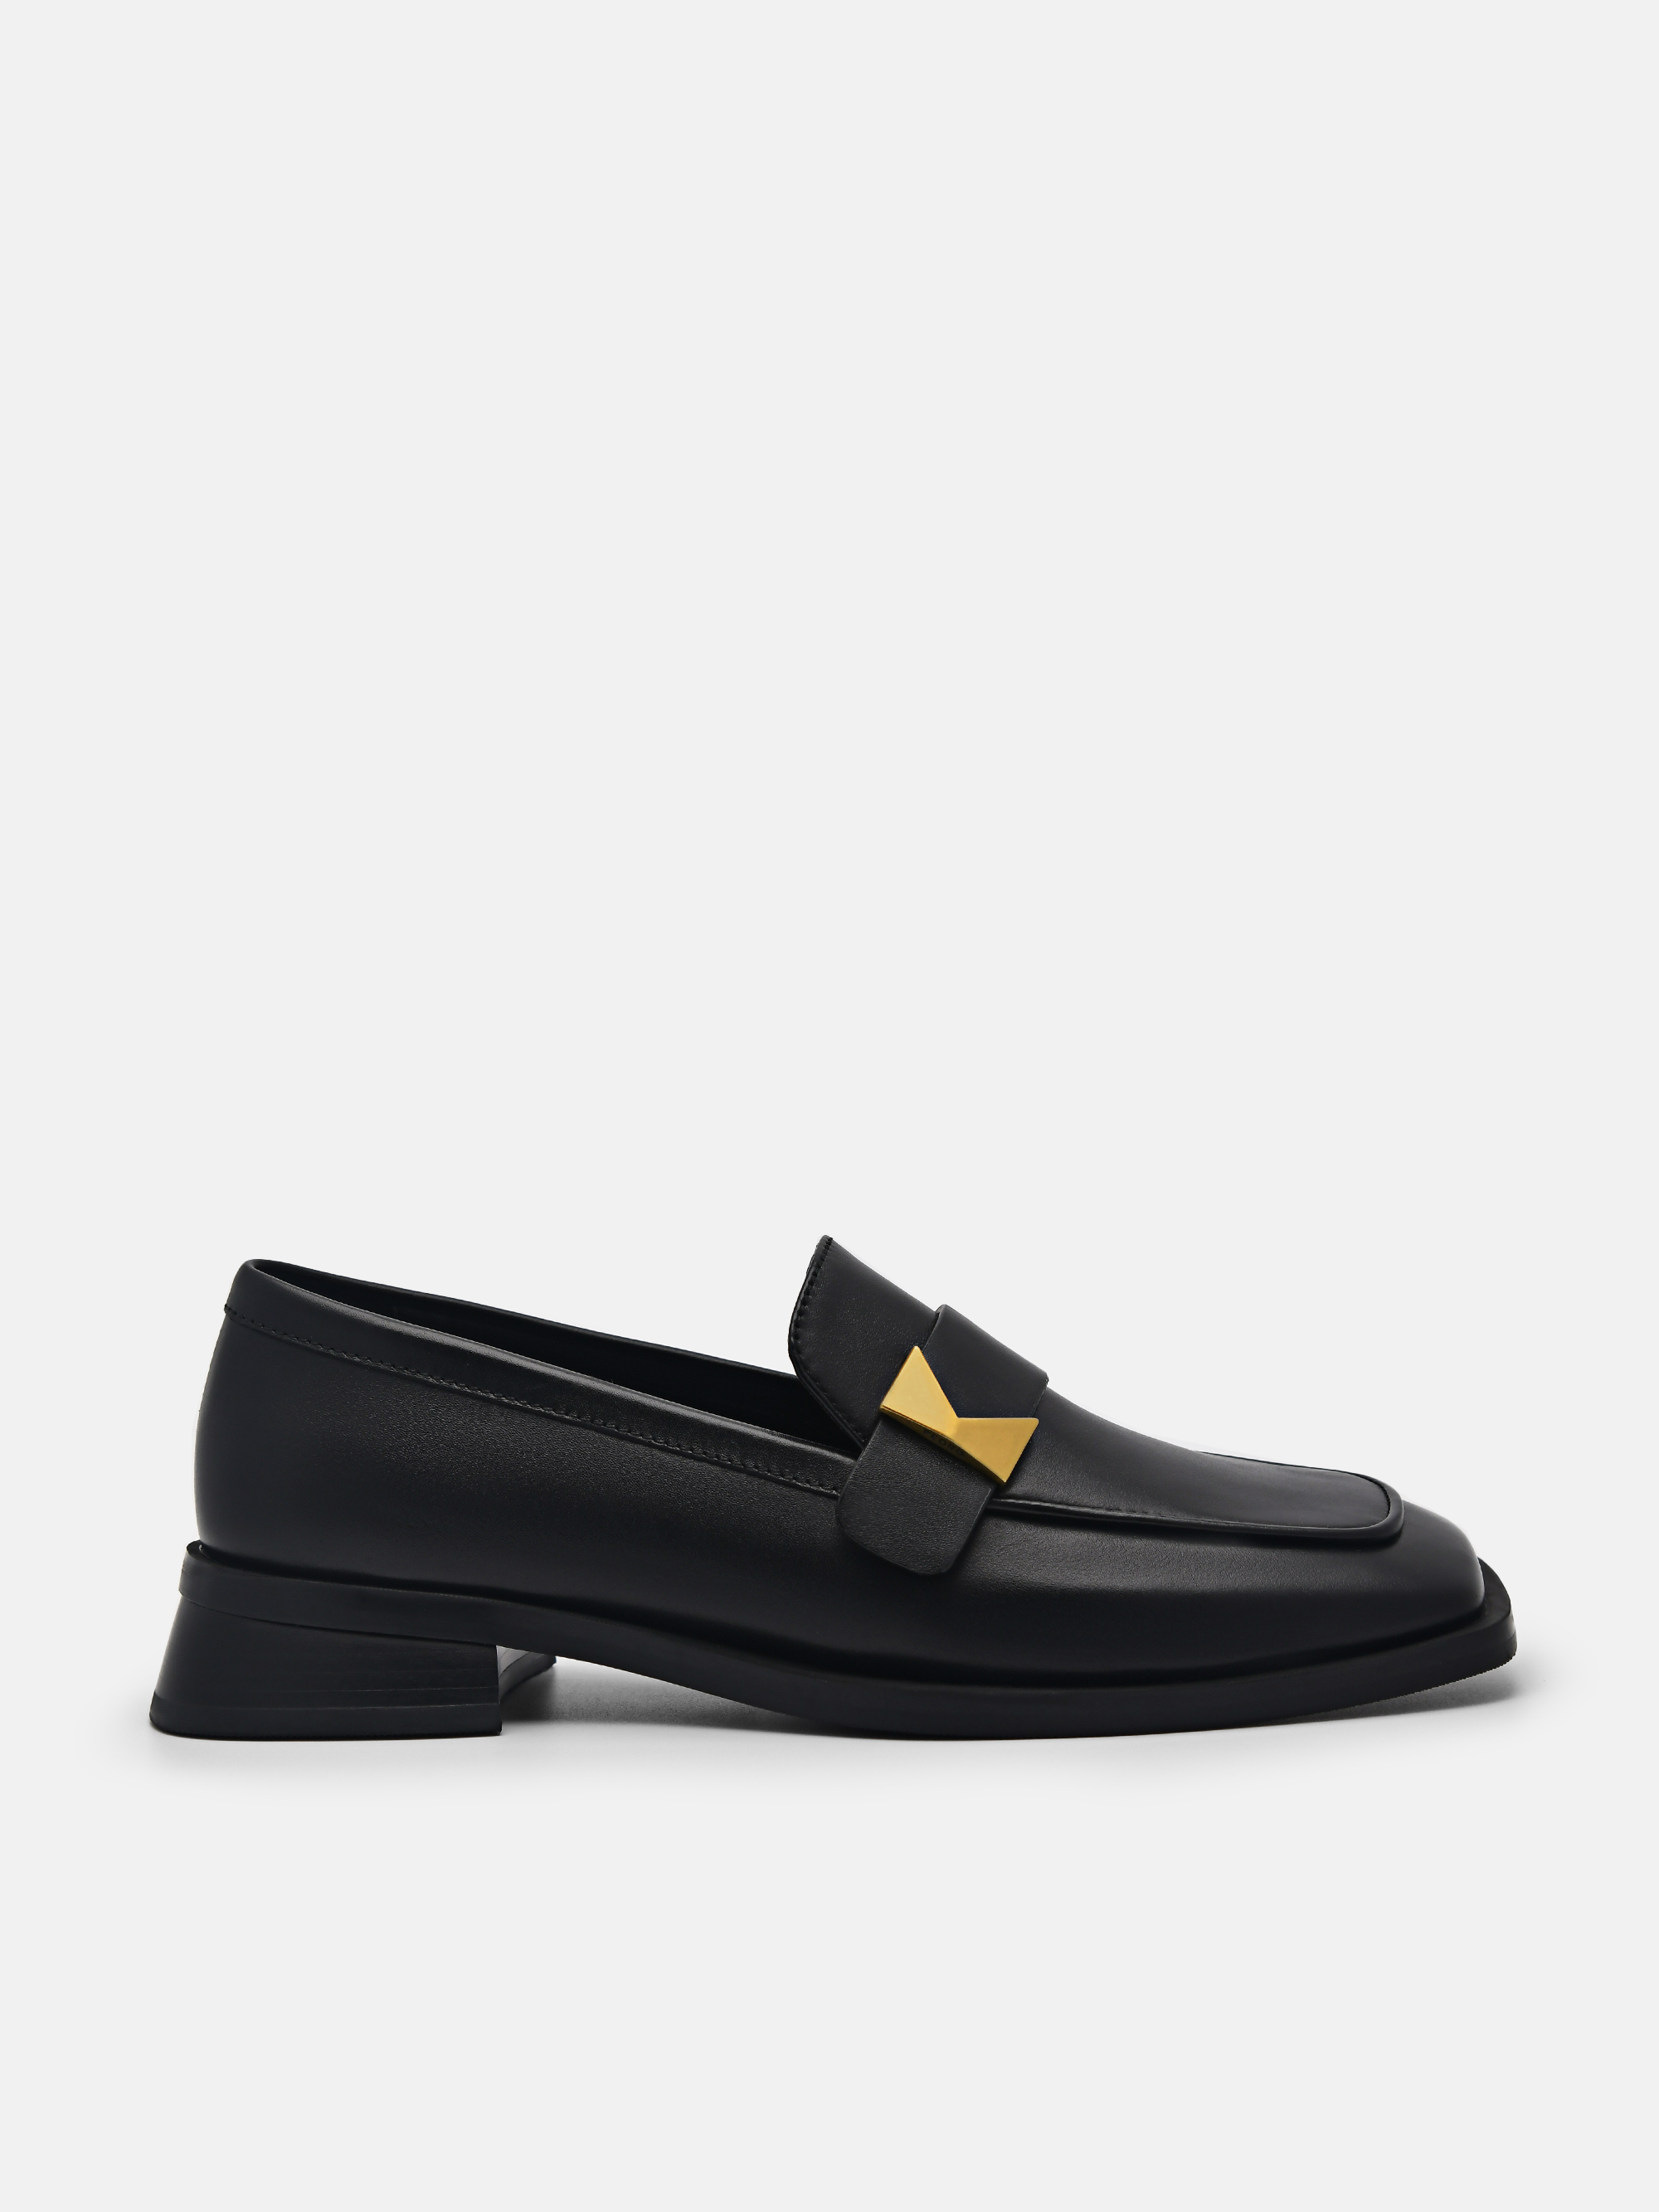 Black Marion Leather Loafers - PEDRO International